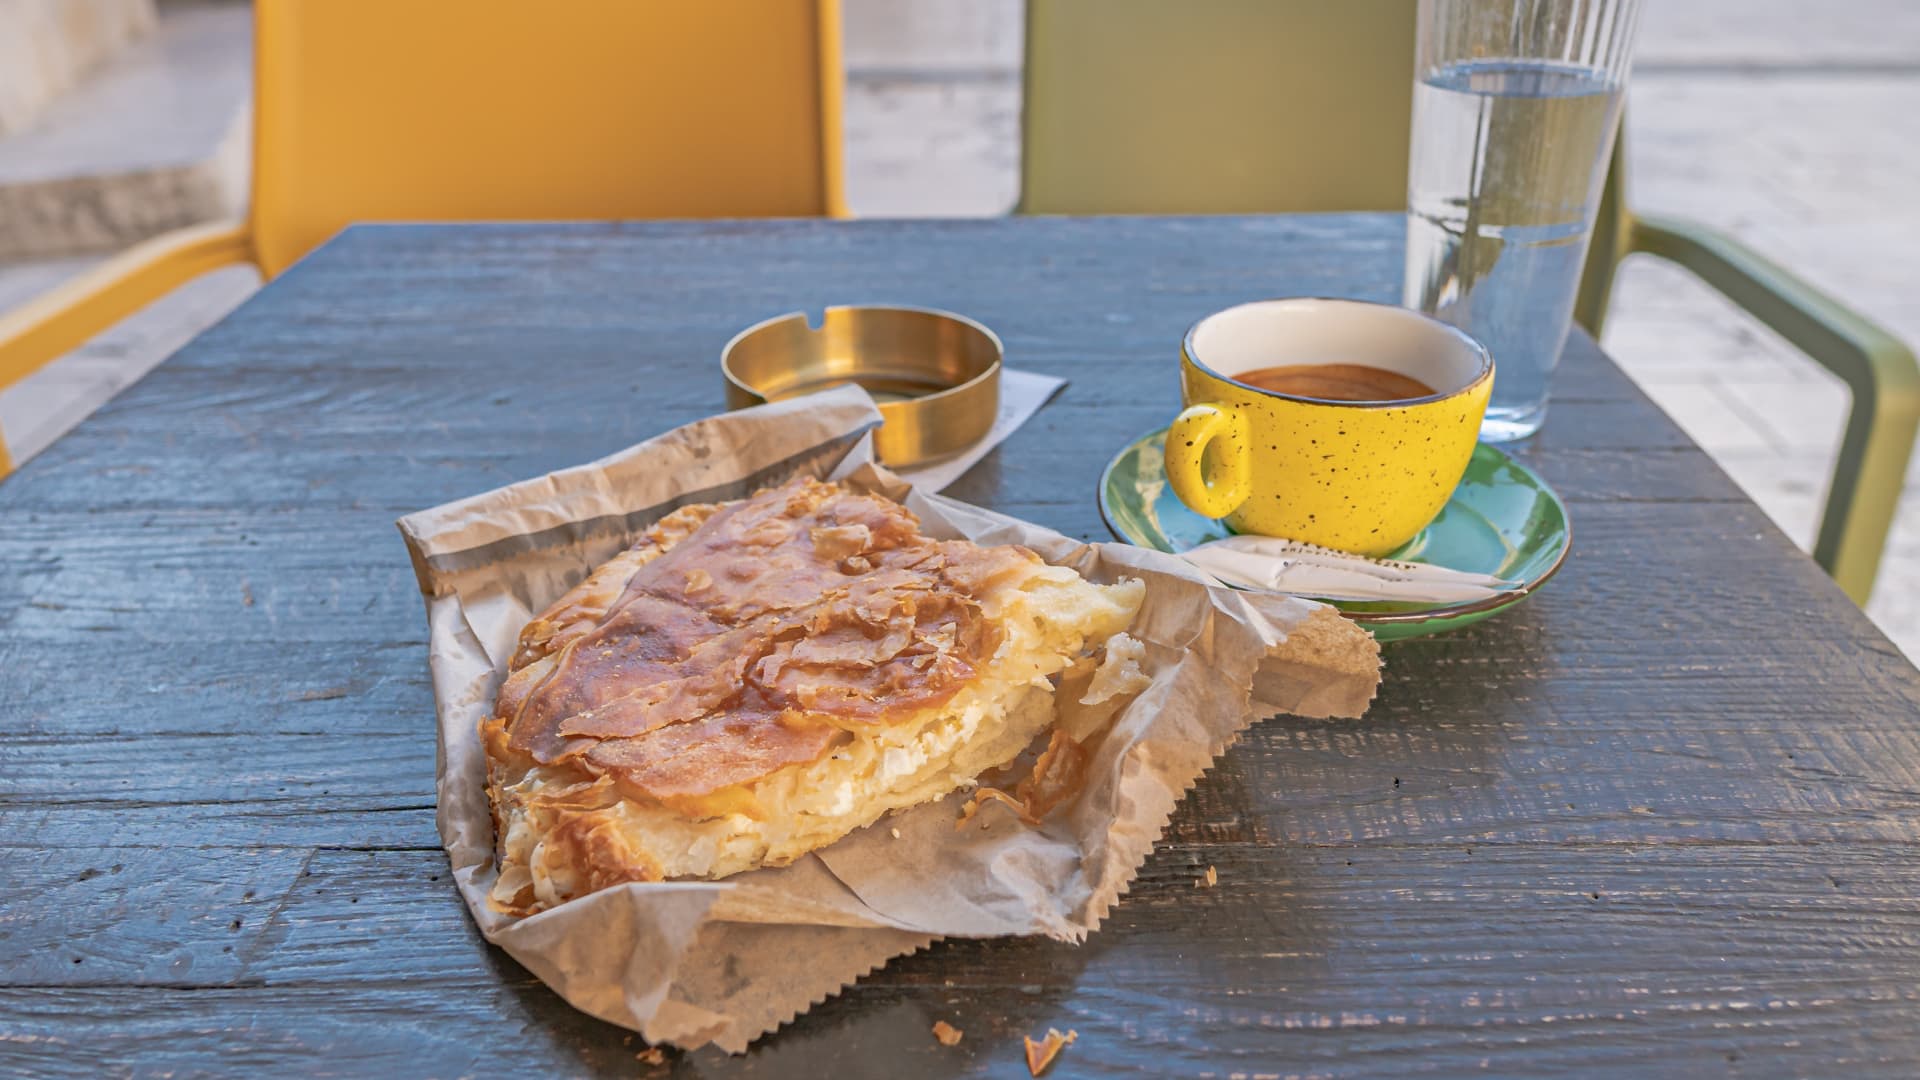 A cheese burek and a double espresso at a café in Split costs around $5.